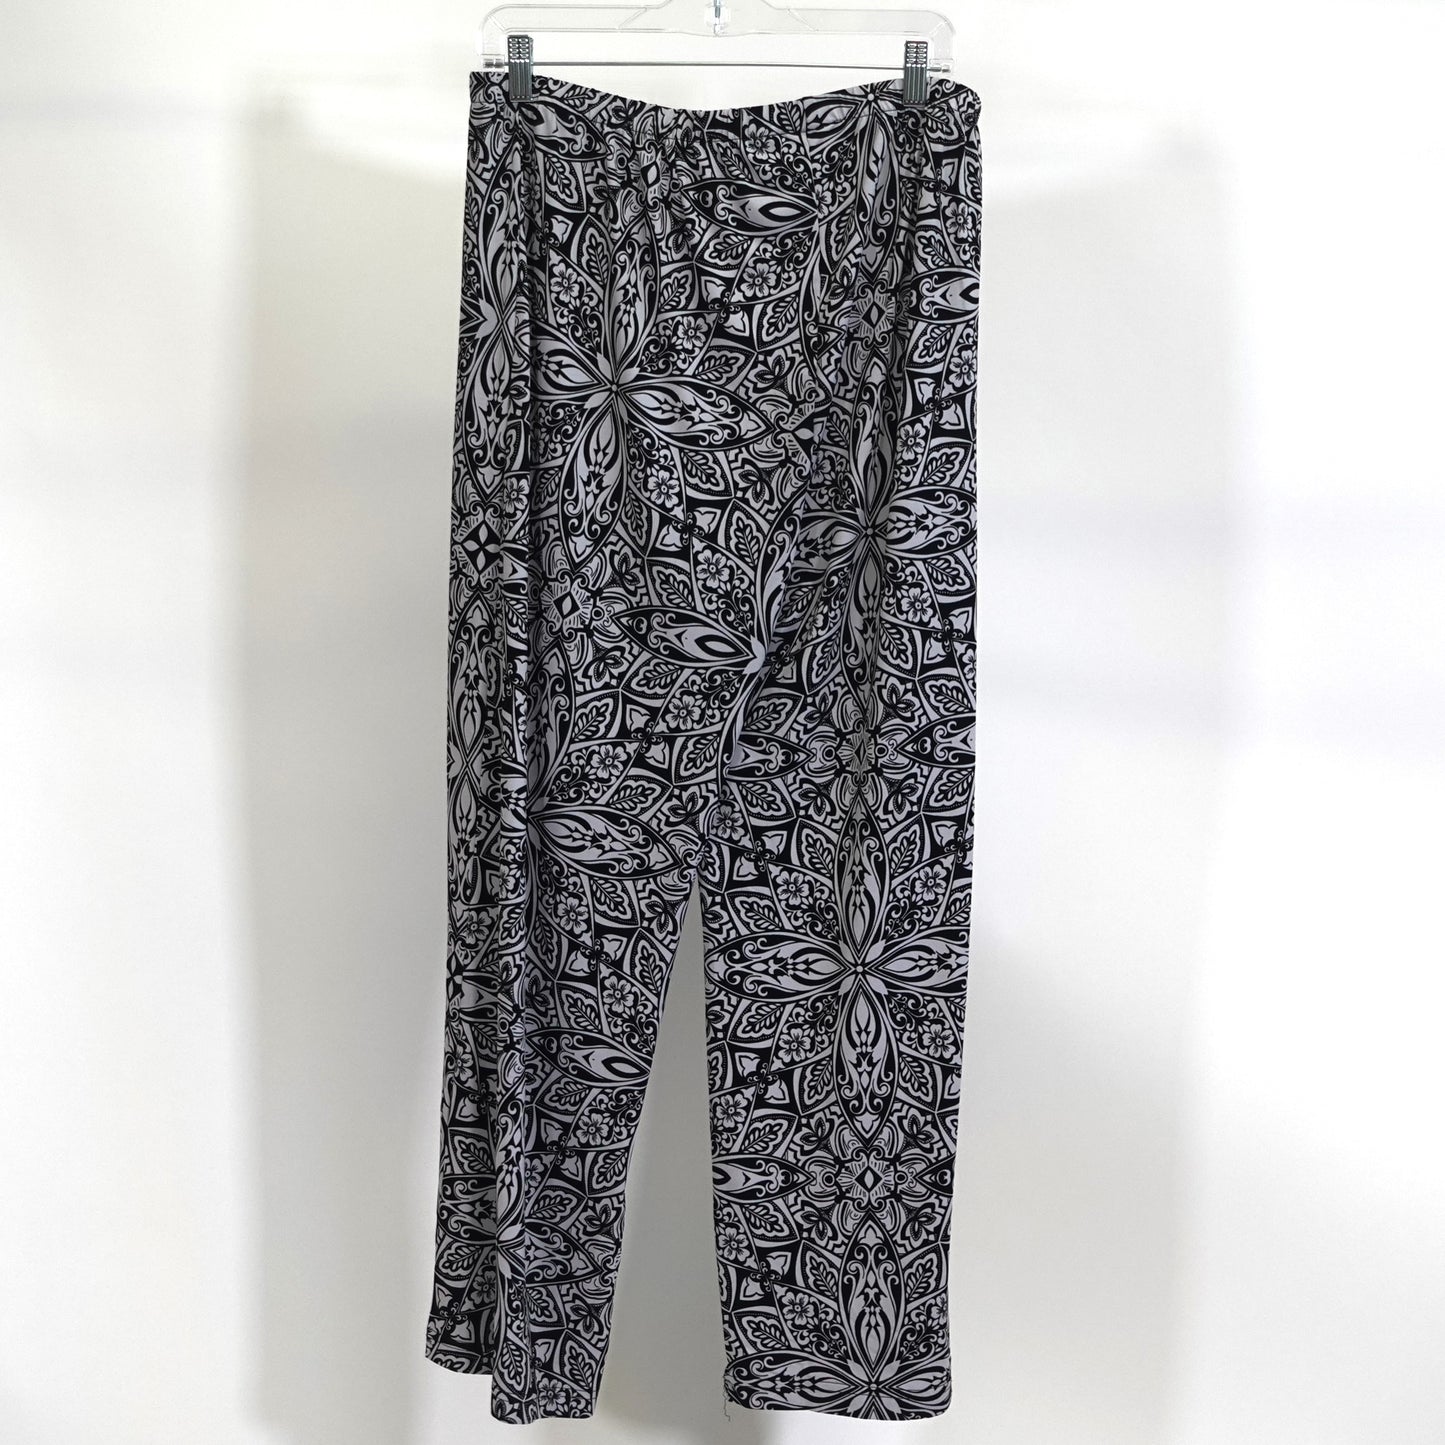 Black and White Print Pull-On Pants